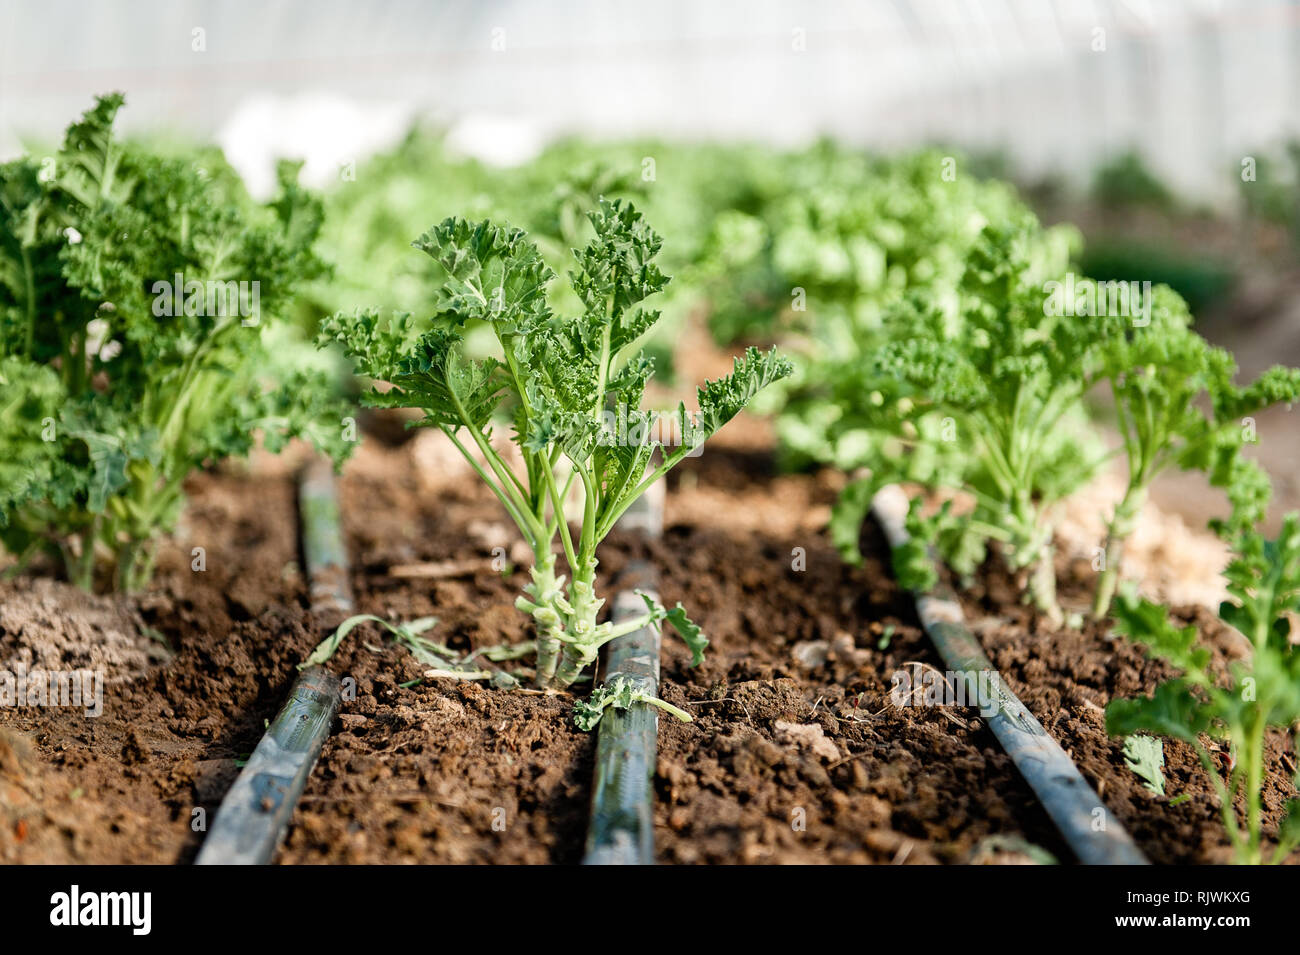 A side view of curly kale plants that have been cultivated and harvested. Stock Photo